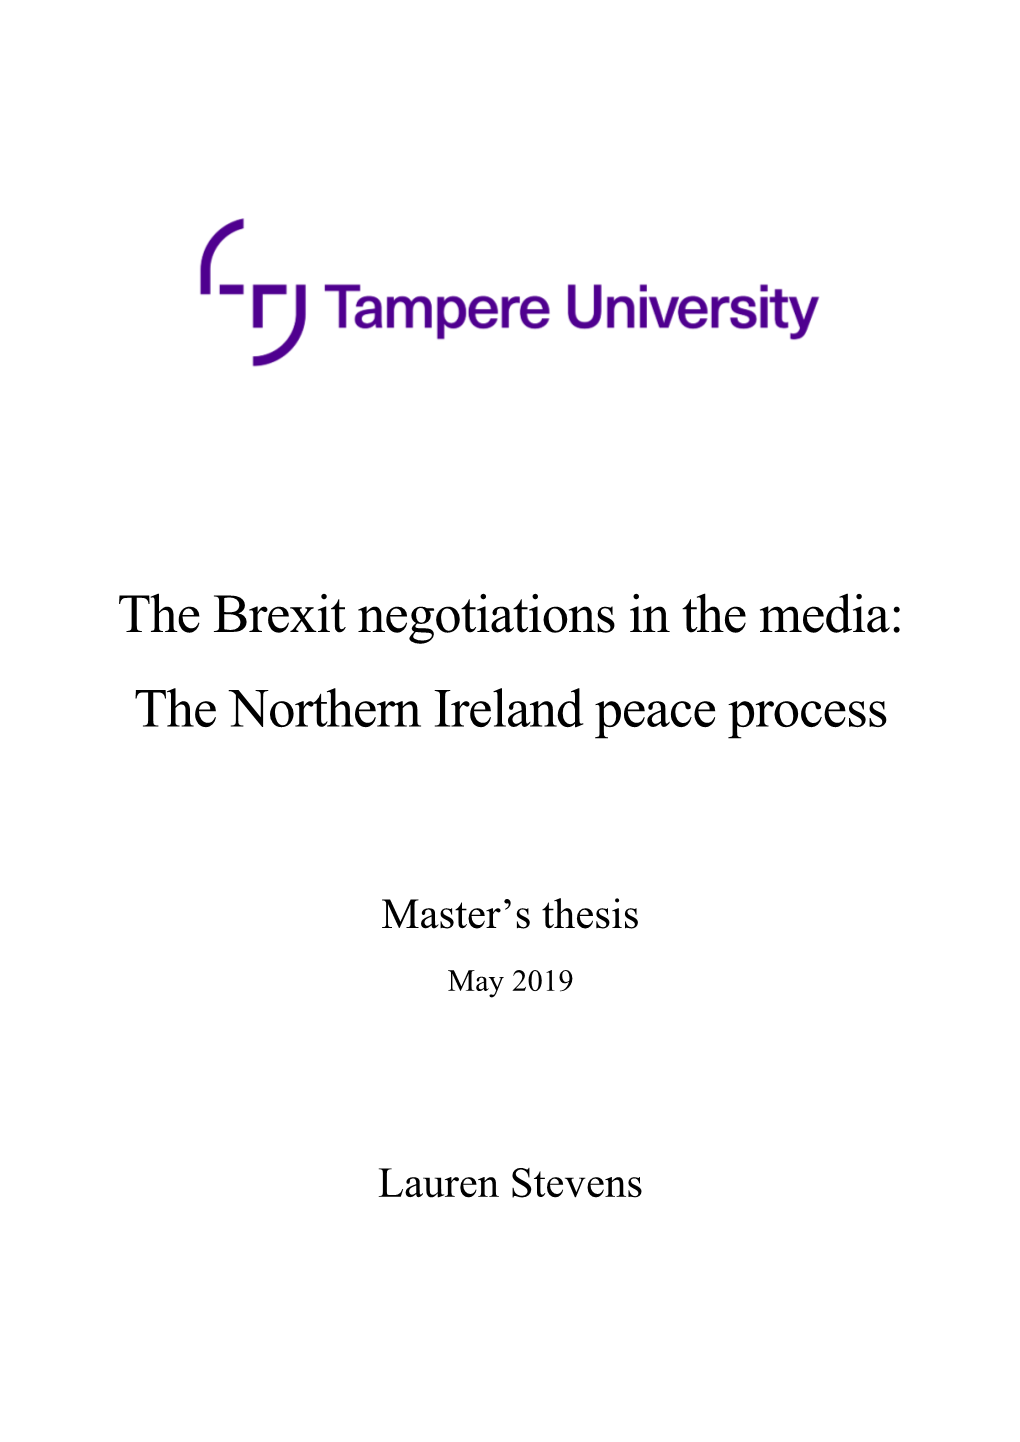 The Brexit Negotiations in the Media: the Northern Ireland Peace Process